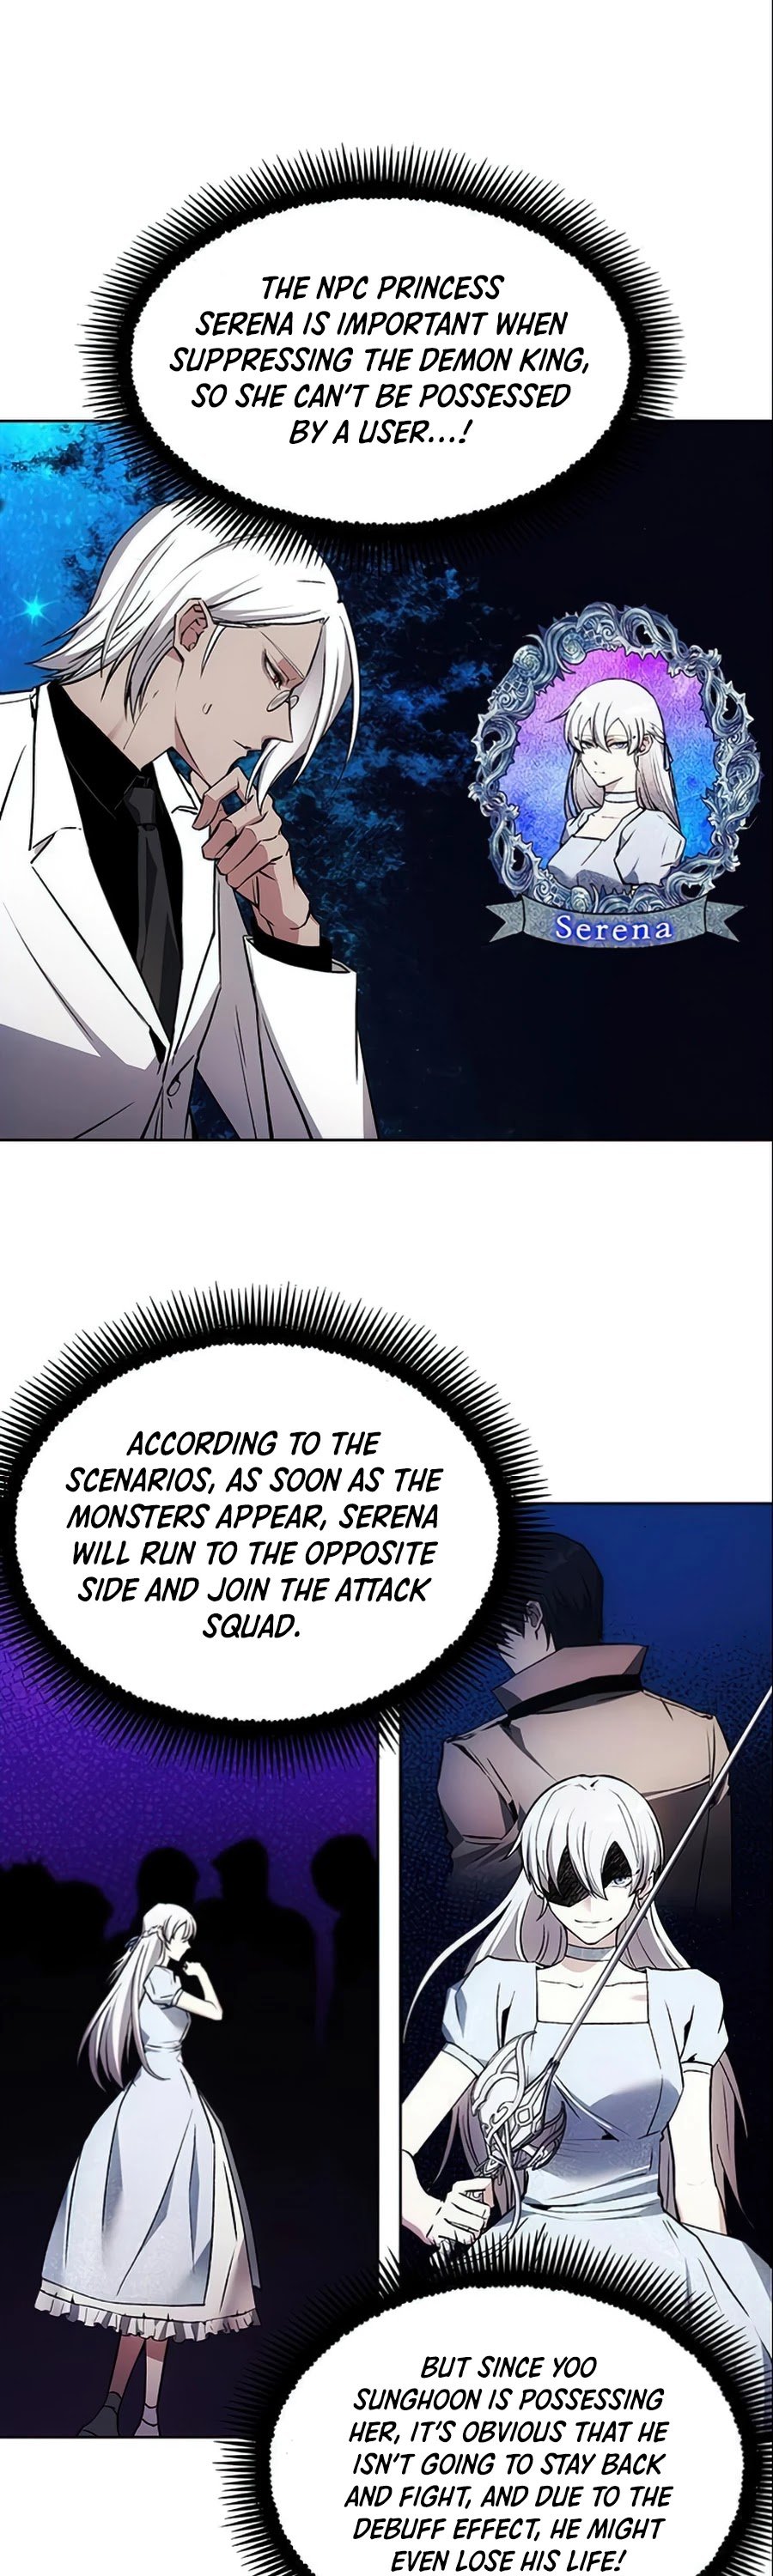 How to Live as a Villain chapter 15